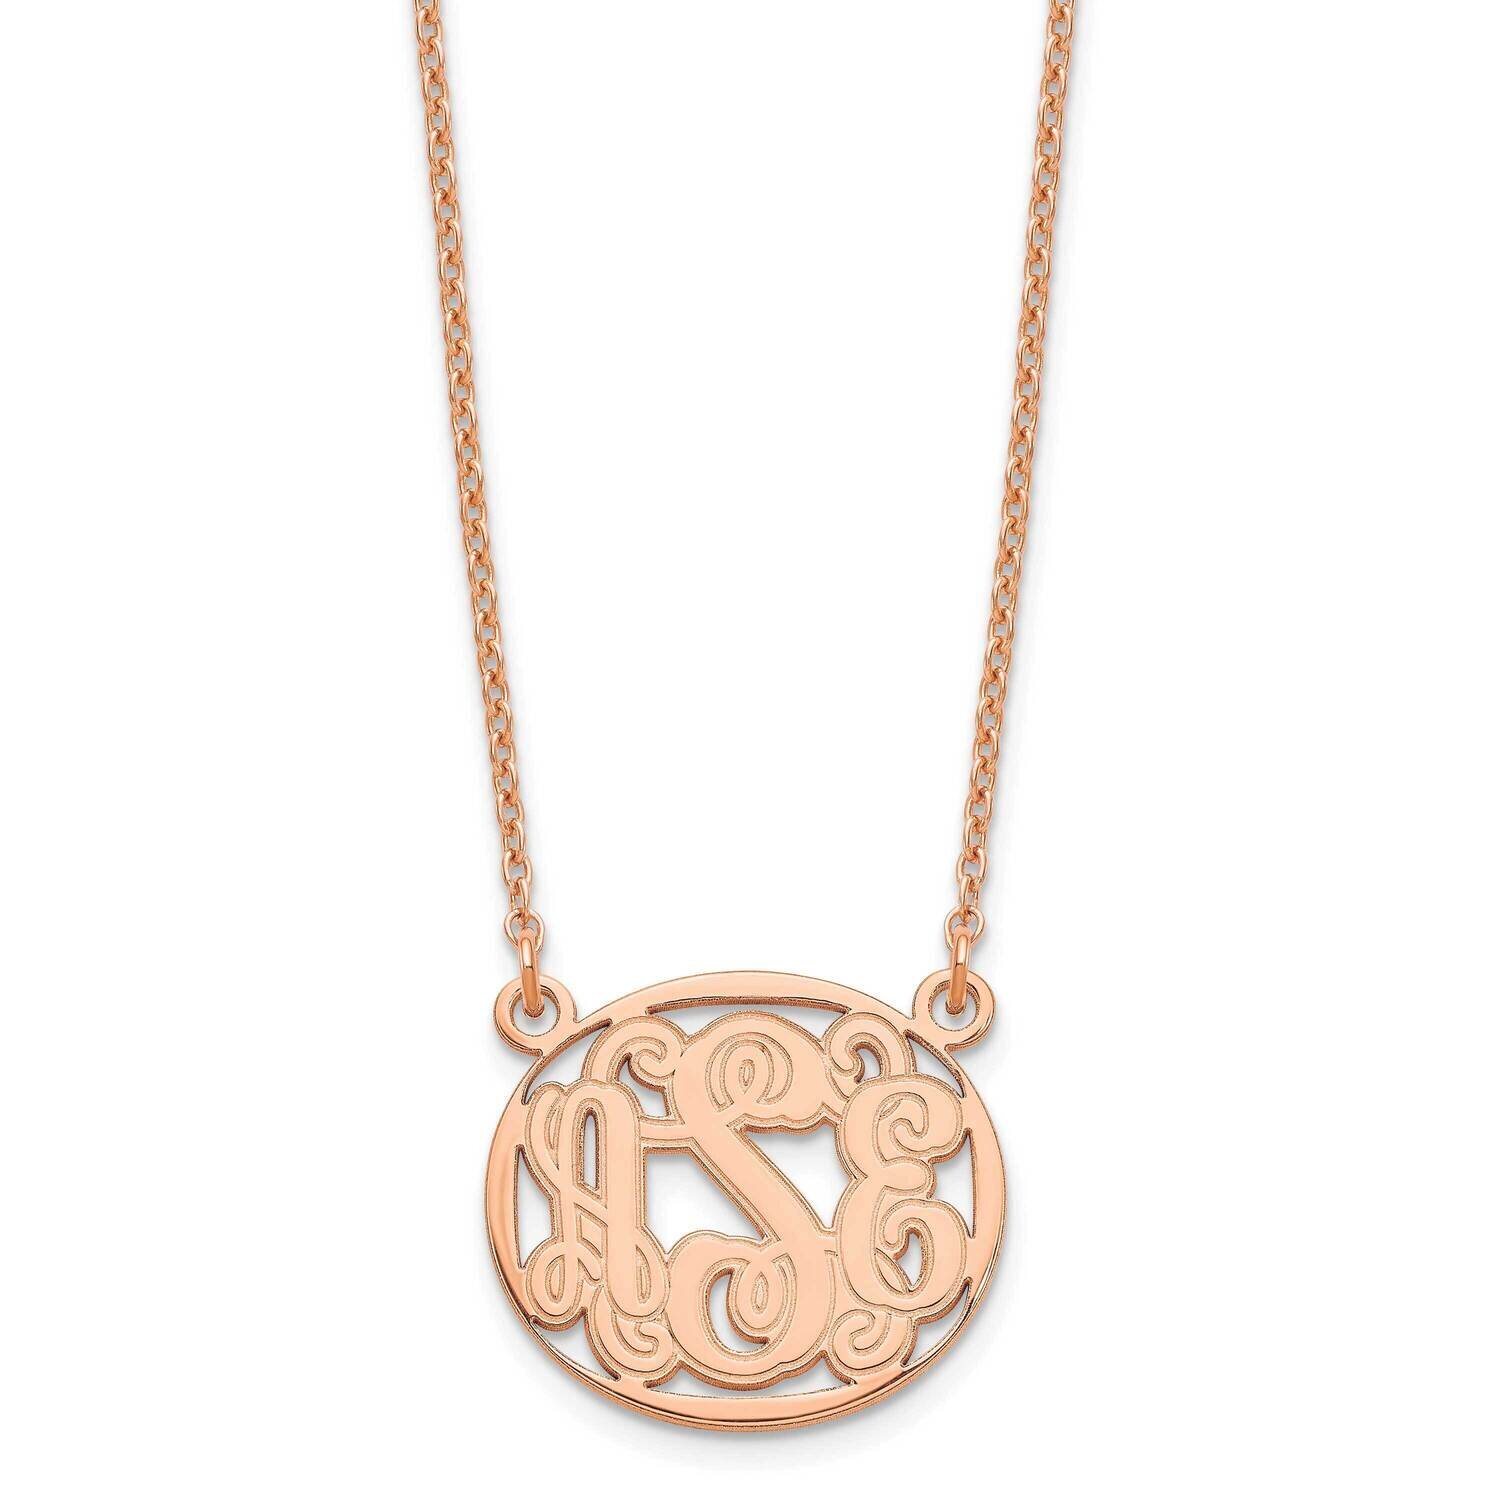 Etched Outline Oval Monogram Necklace Sterling Silver Rose-plated XNA579RP